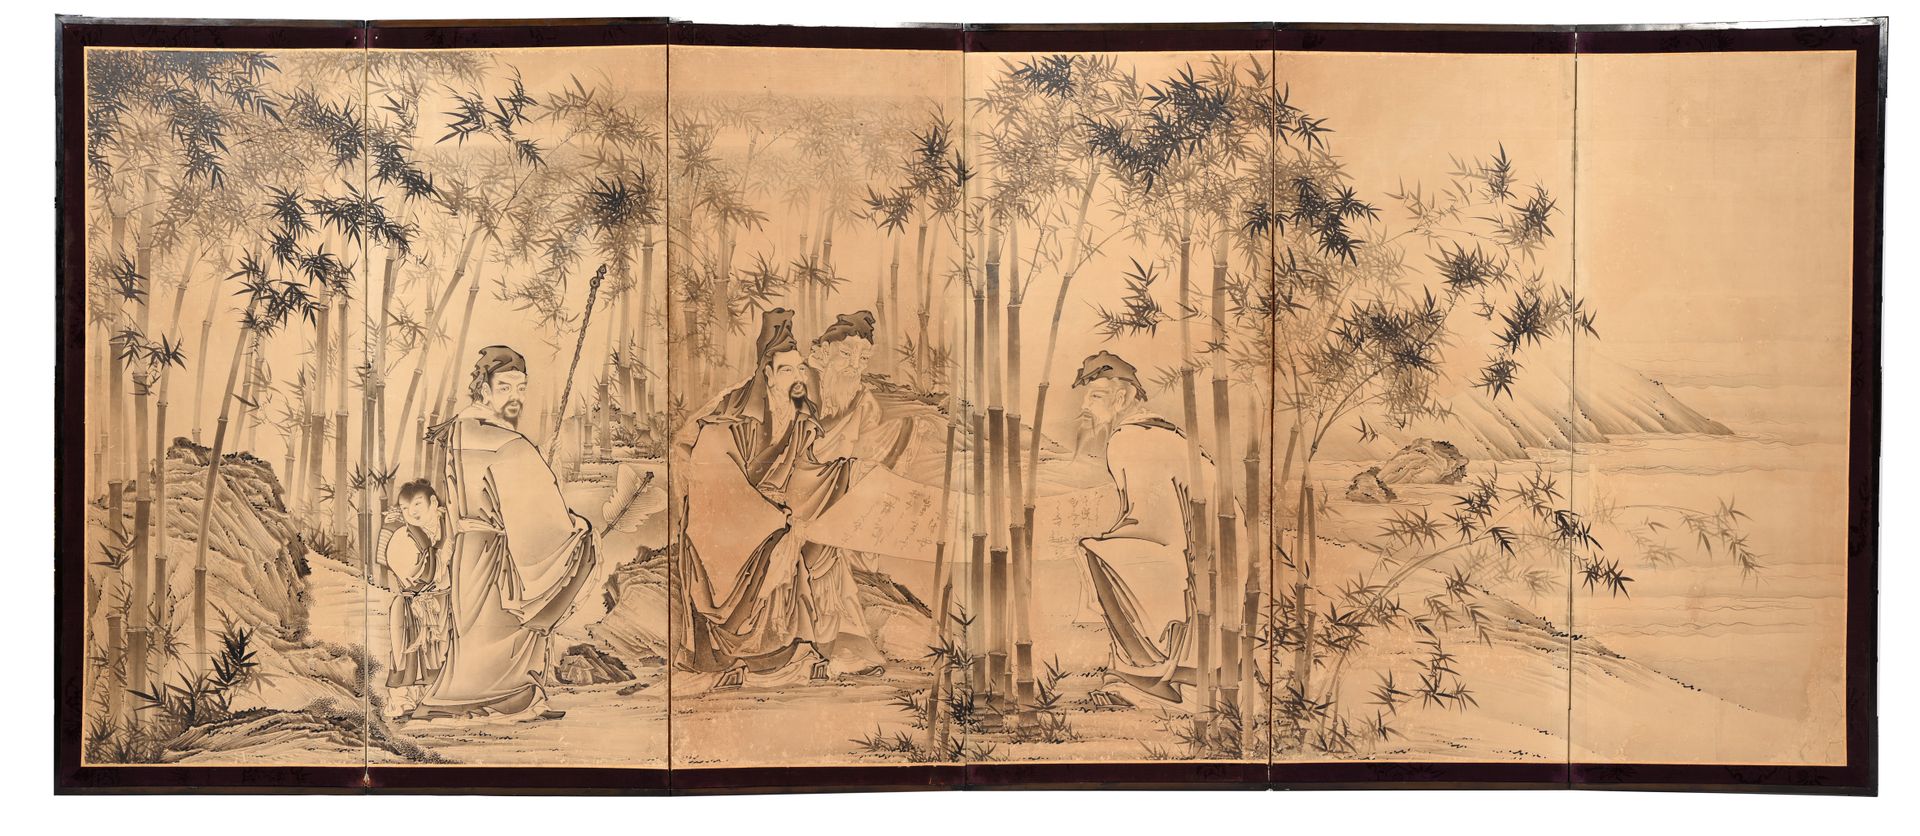 Null SIX-LEAF FOLDING SCREEN
Ink and wash on paper, representing sages in a bamb&hellip;